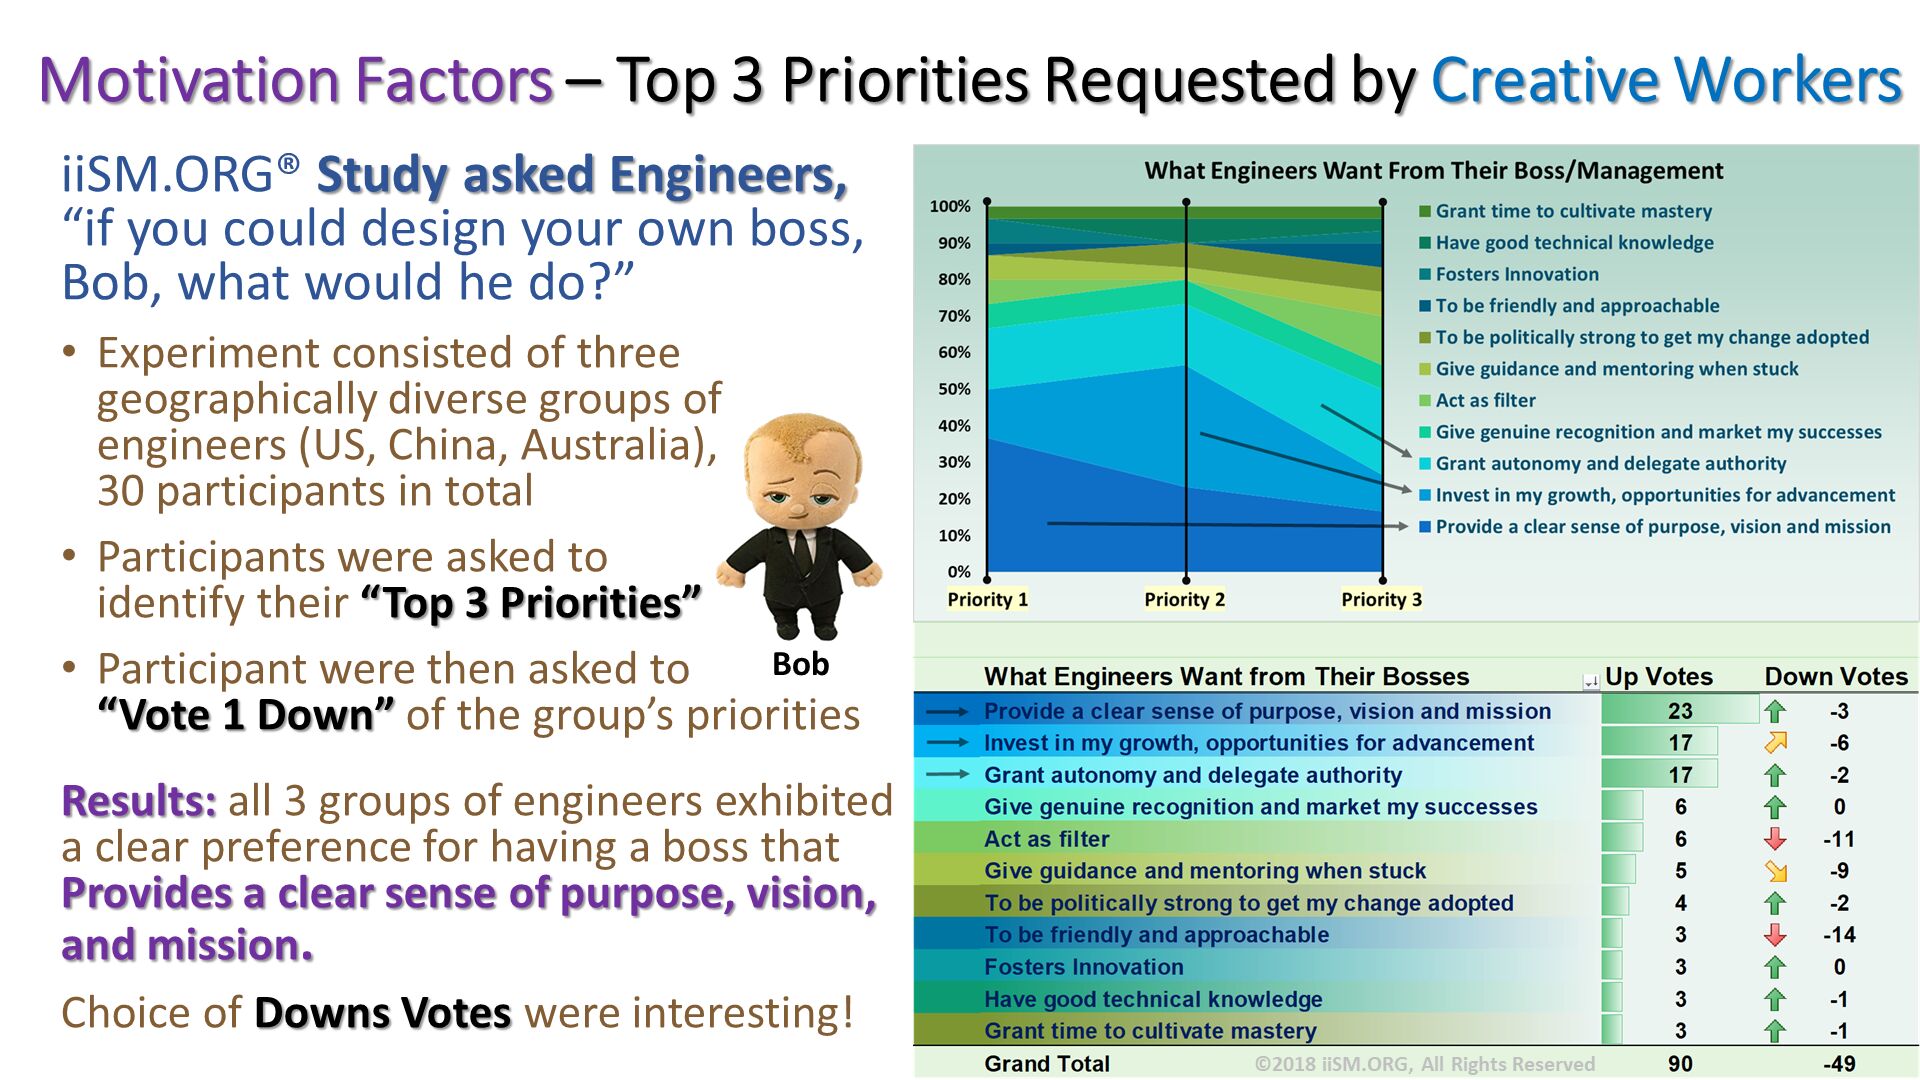 iiSM.ORG® Study asked Engineers, “if you could design your own boss, Bob, what would he do?”  
Experiment consisted of three geographically diverse groups of engineers (US, China, Australia), 30 participants in total
Participants were asked to identify their “Top 3 Priorities”
Participant were then asked to “Vote 1 Down” of the group’s priorities
Results: all 3 groups of engineers exhibited a clear preference for having a boss that Provides a clear sense of purpose, vision, and mission.  
Choice of Downs Votes were interesting!. Motivation Factors – Top 3 Priorities Requested by Creative Workers. ©2018 iiSM.ORG, All Rights Reserved. 